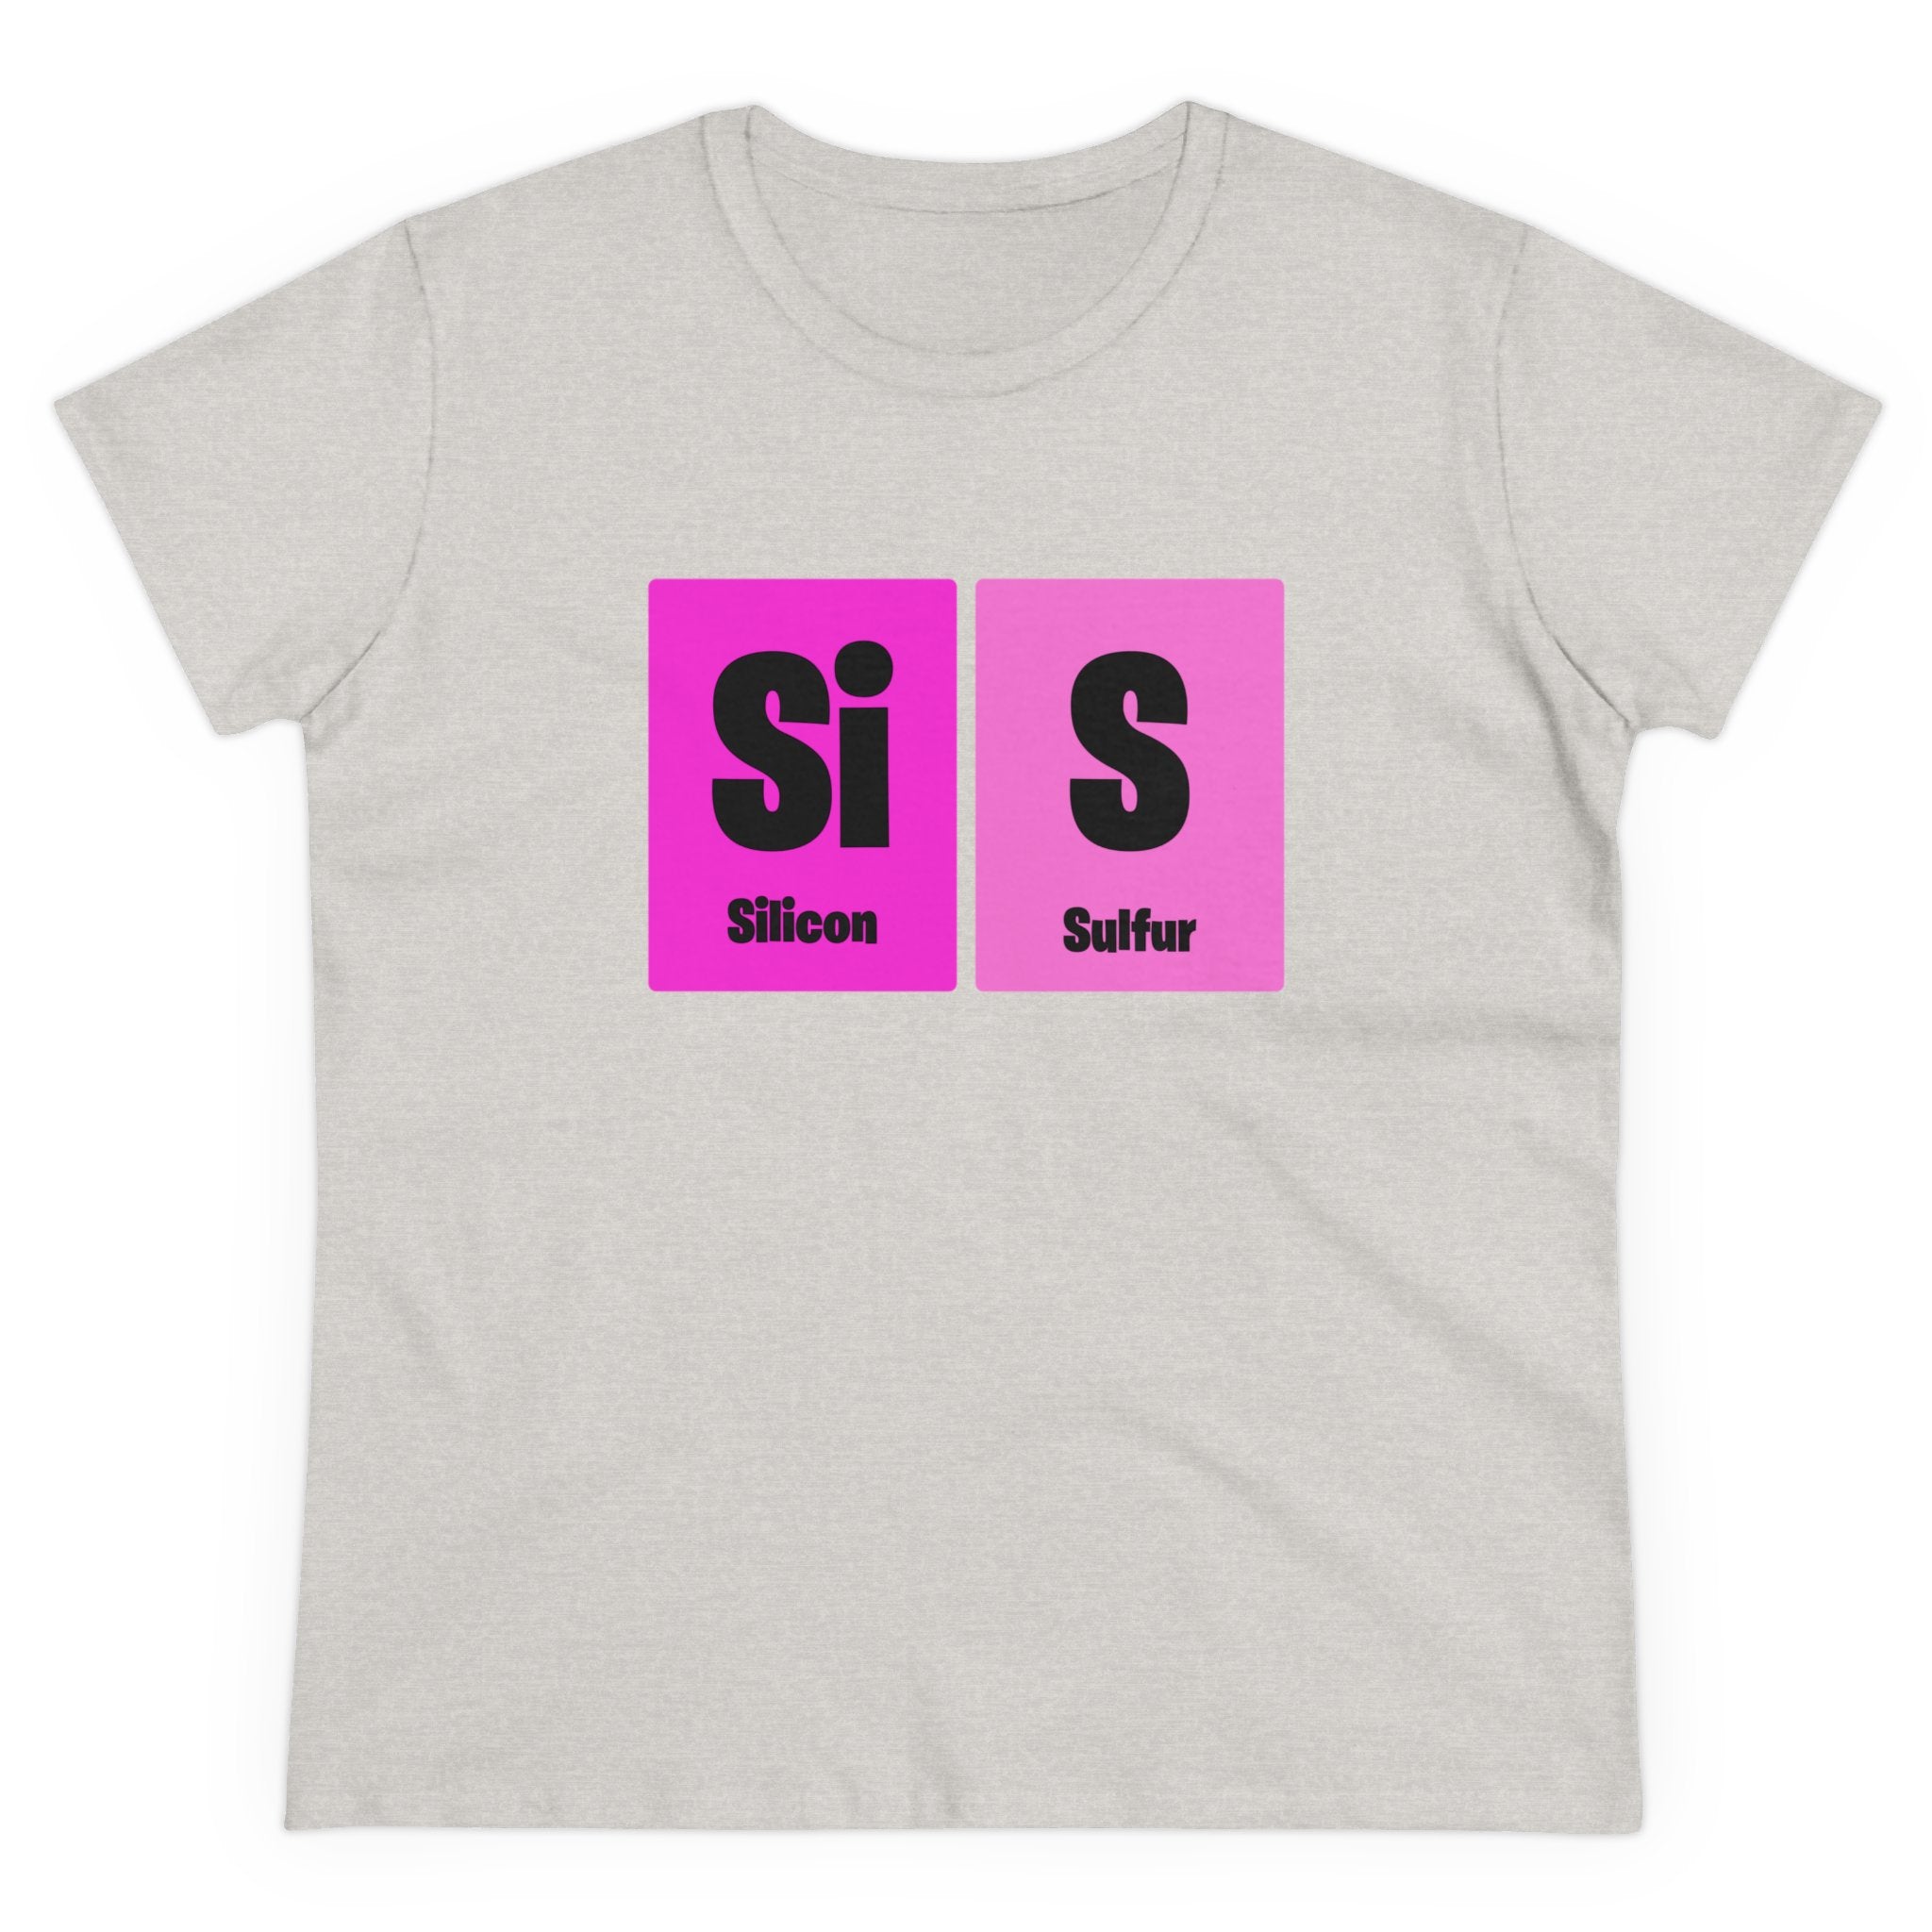 Discover cozy fashion with this Si-S Light Pendant - Women's Tee featuring a unique design of the periodic elements Silicon (Si) and Sulfur (S) displayed in pink boxes with black text. It's an effortlessly stylish addition to your wardrobe.